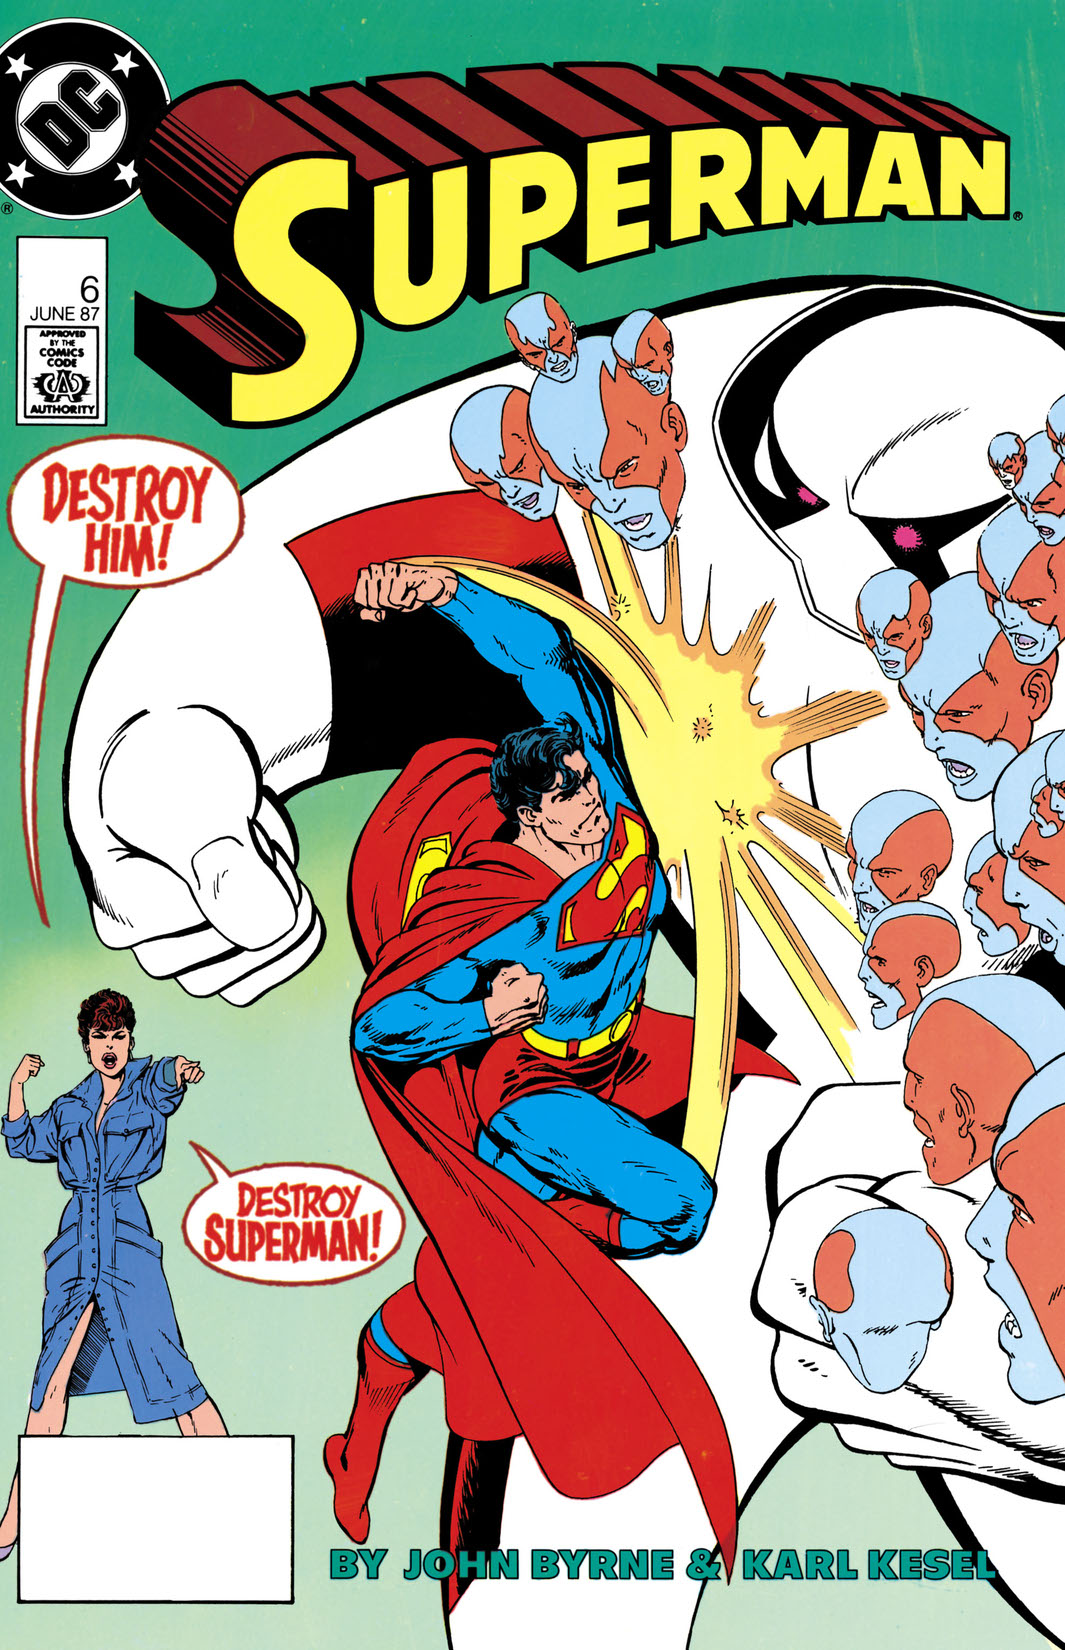 Superman (1986-) #6 preview images